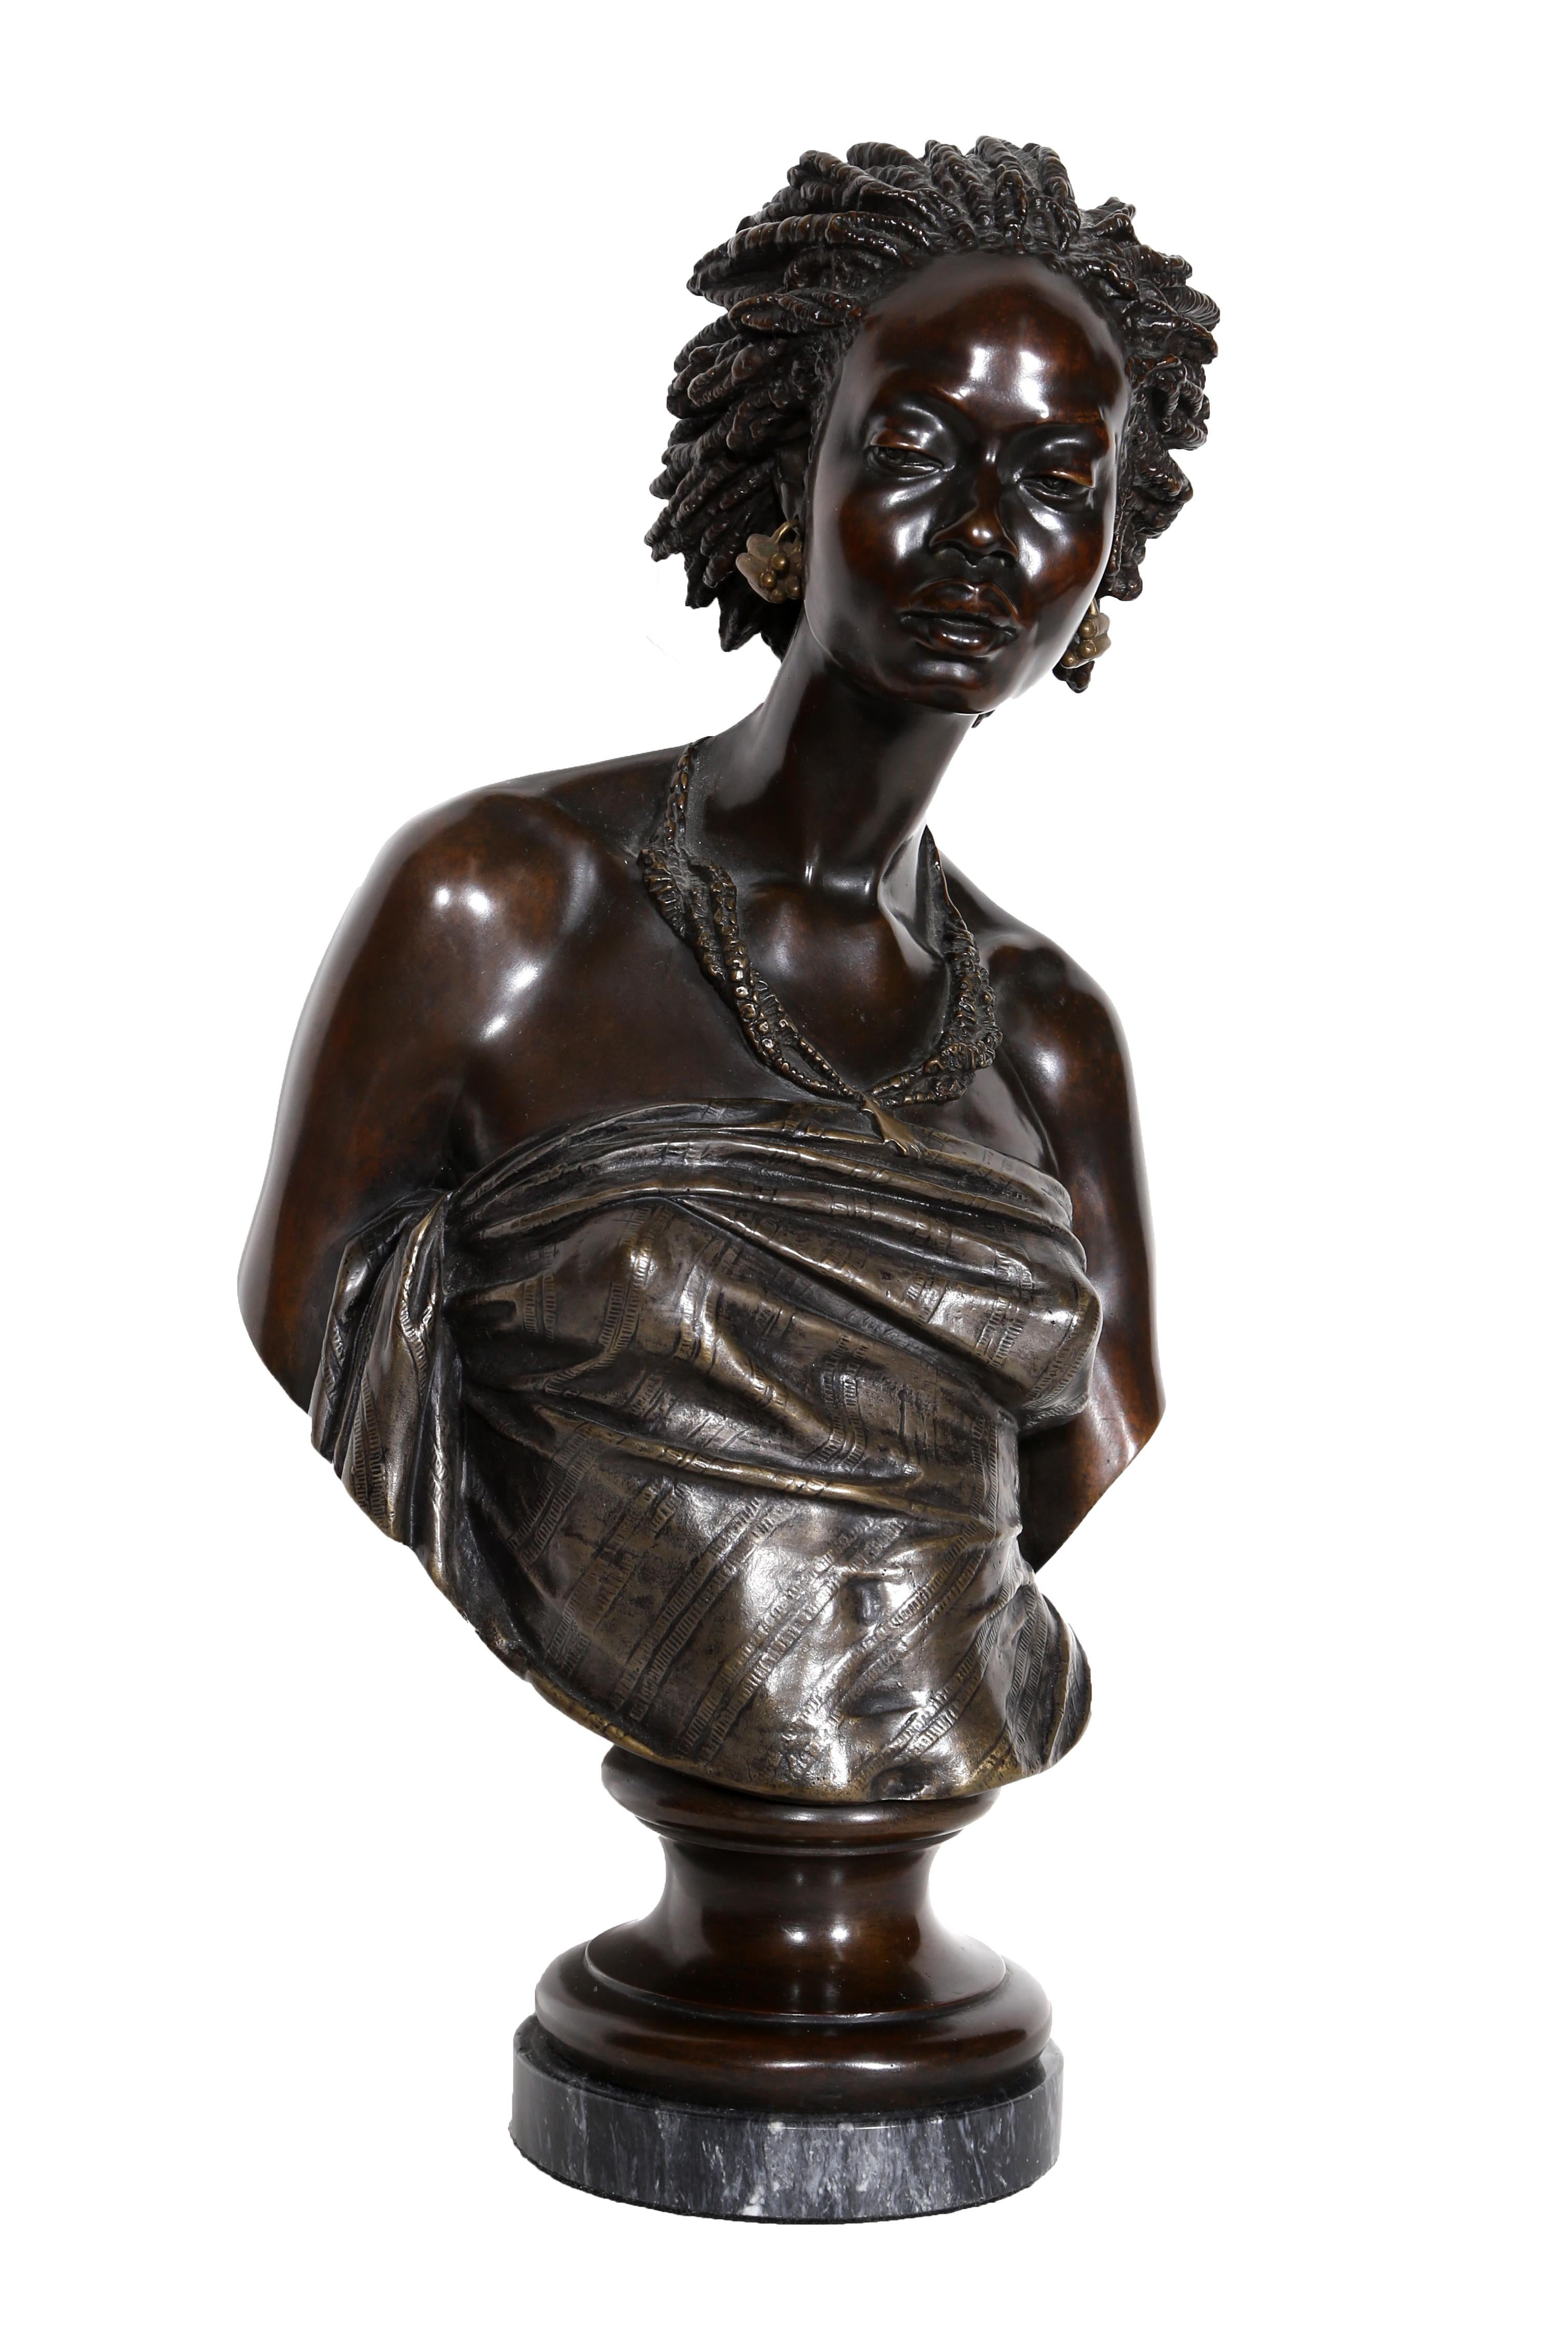 Venus Africaine by Charles Cordier, French (1827–1905)
Bronze Sculpture, signature inscribed
Size: 15 x 9 x 5 in. (38.1 x 22.86 x 12.7 cm)